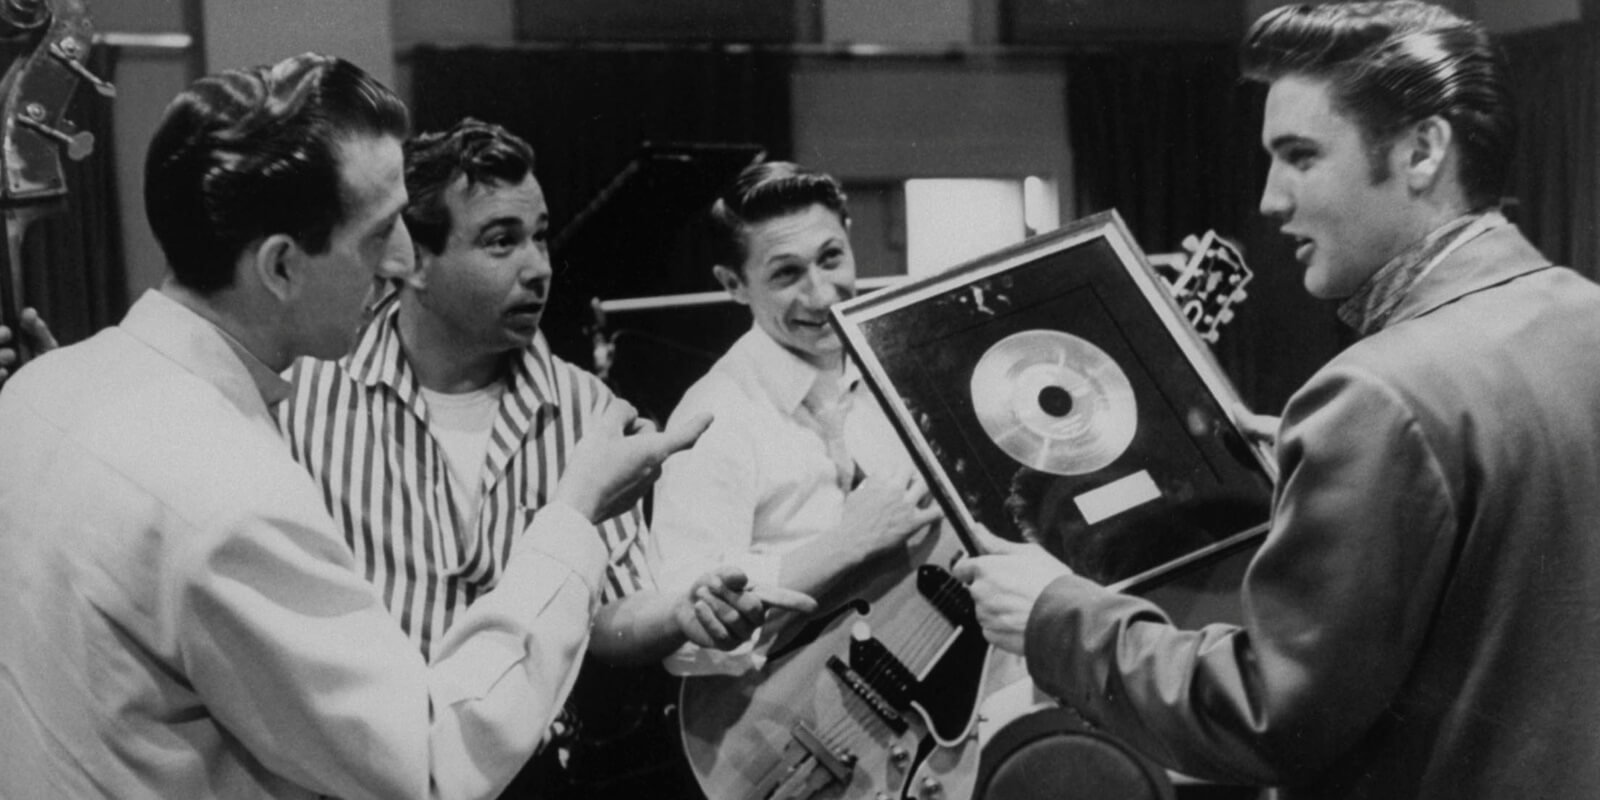 Elvis Presley was awarded a gold record for his 1956 hit 'Heartbreak Hotel' alongside band members D.J. Fontana, Gordon Stoker and Scotty Moore.